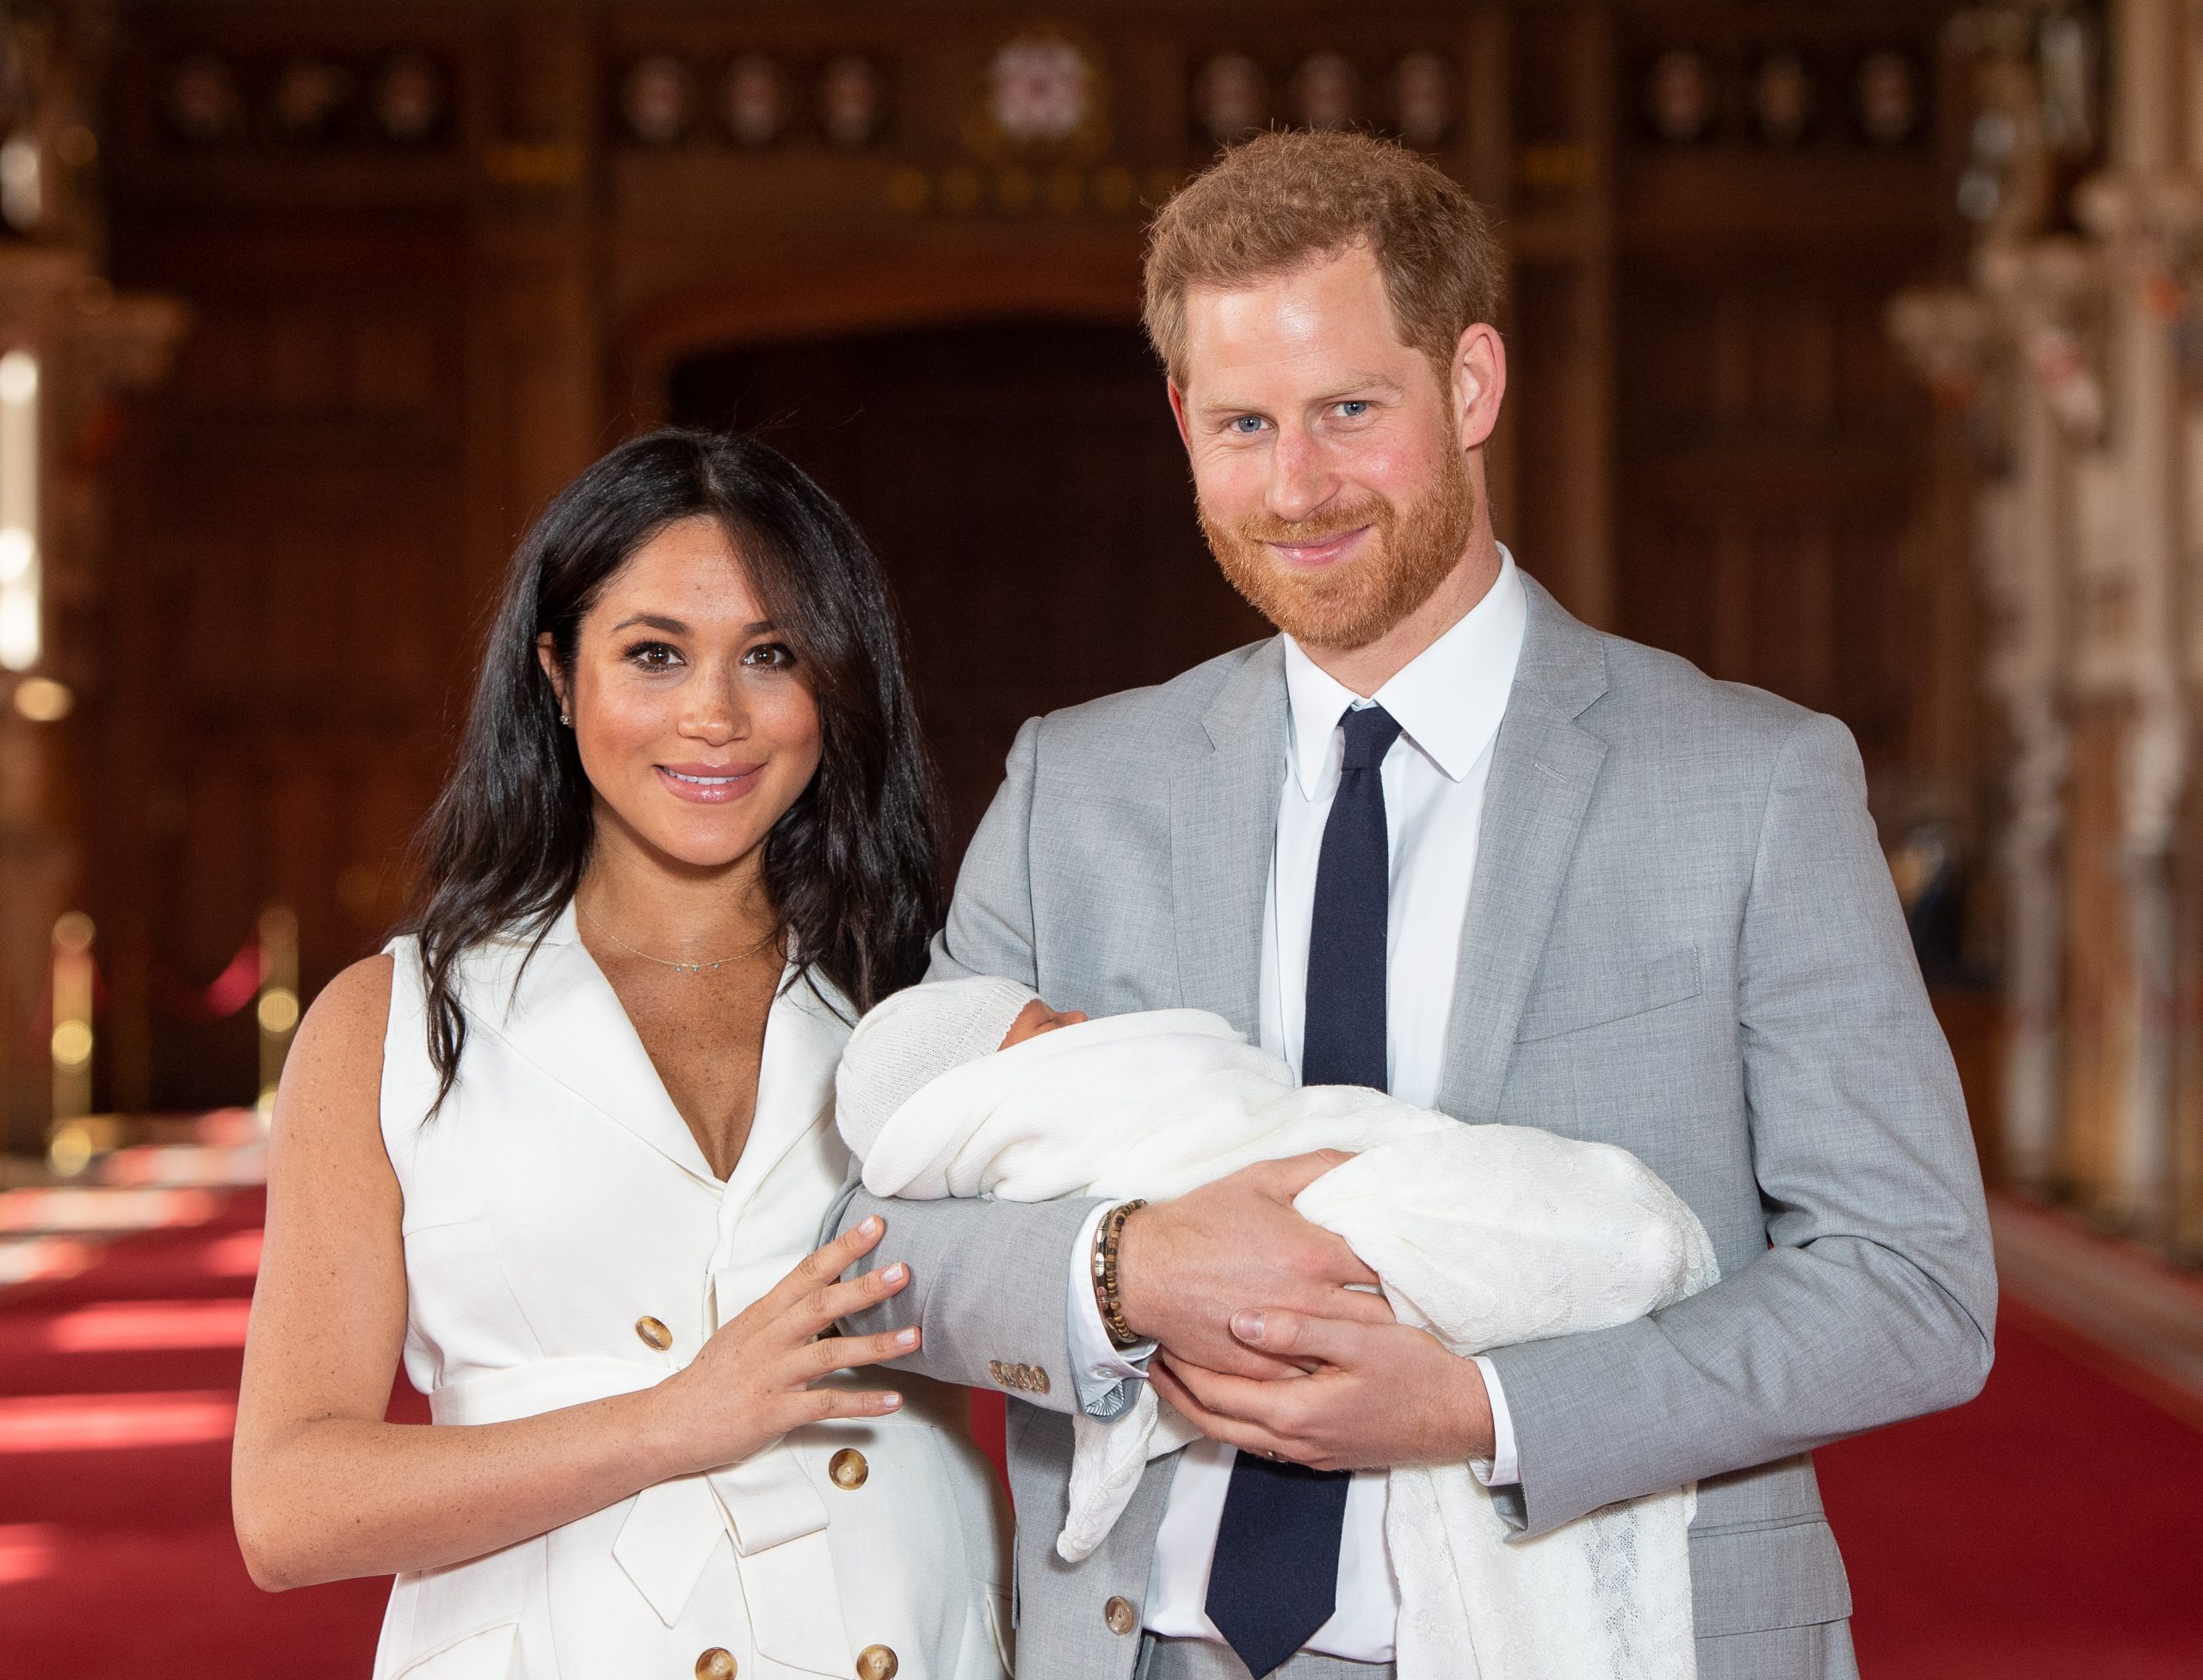 Meghan Markle and Prince Harry To Separate 